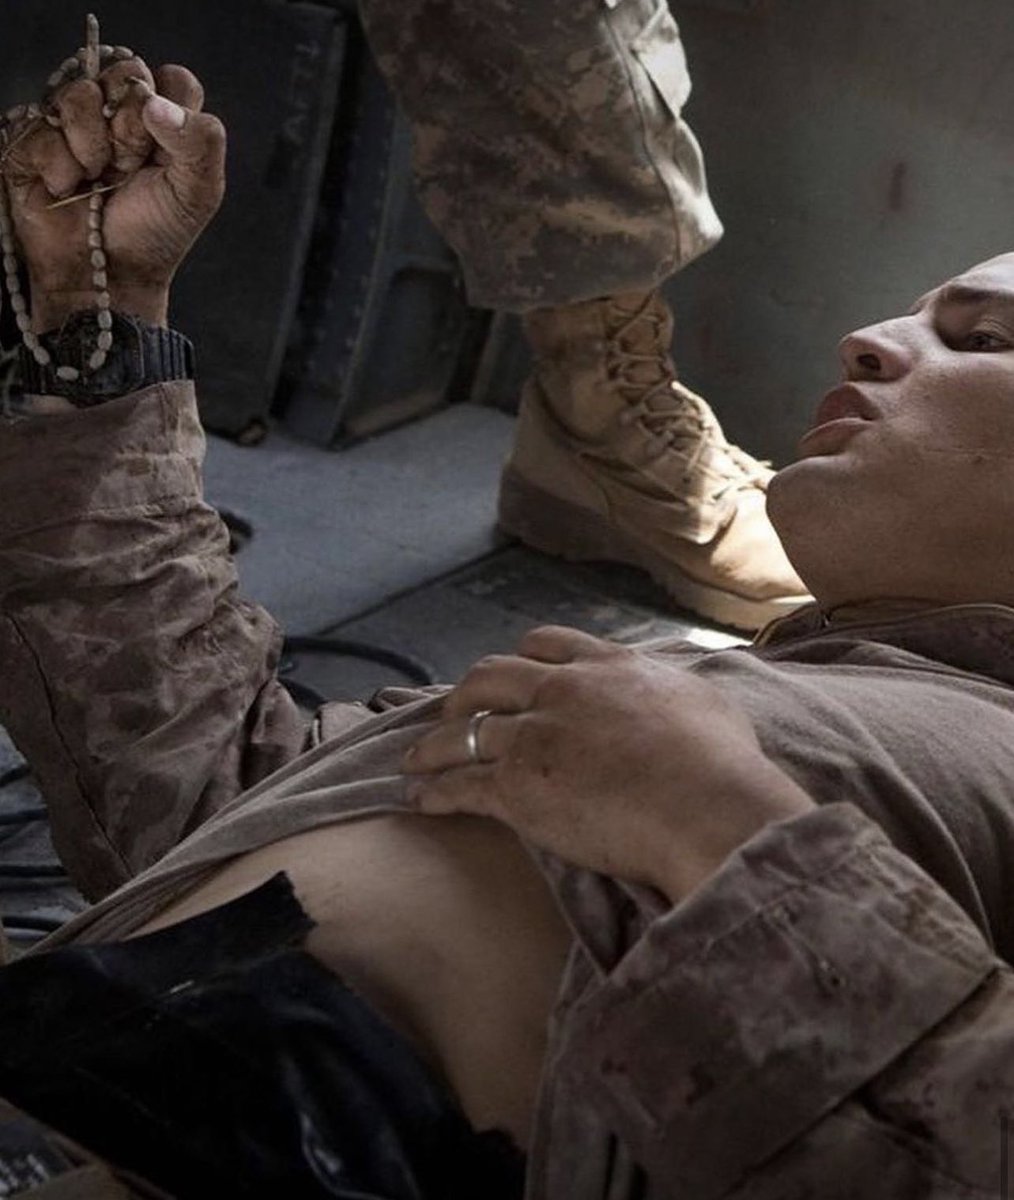 Blas Trevino clutches his rosary beads on a medevac helicopter from US Army's Task Force Lift 'Dust Off,' he got shot in the stomach in Helmand Province Afghanistan, he recovered from his wounds.